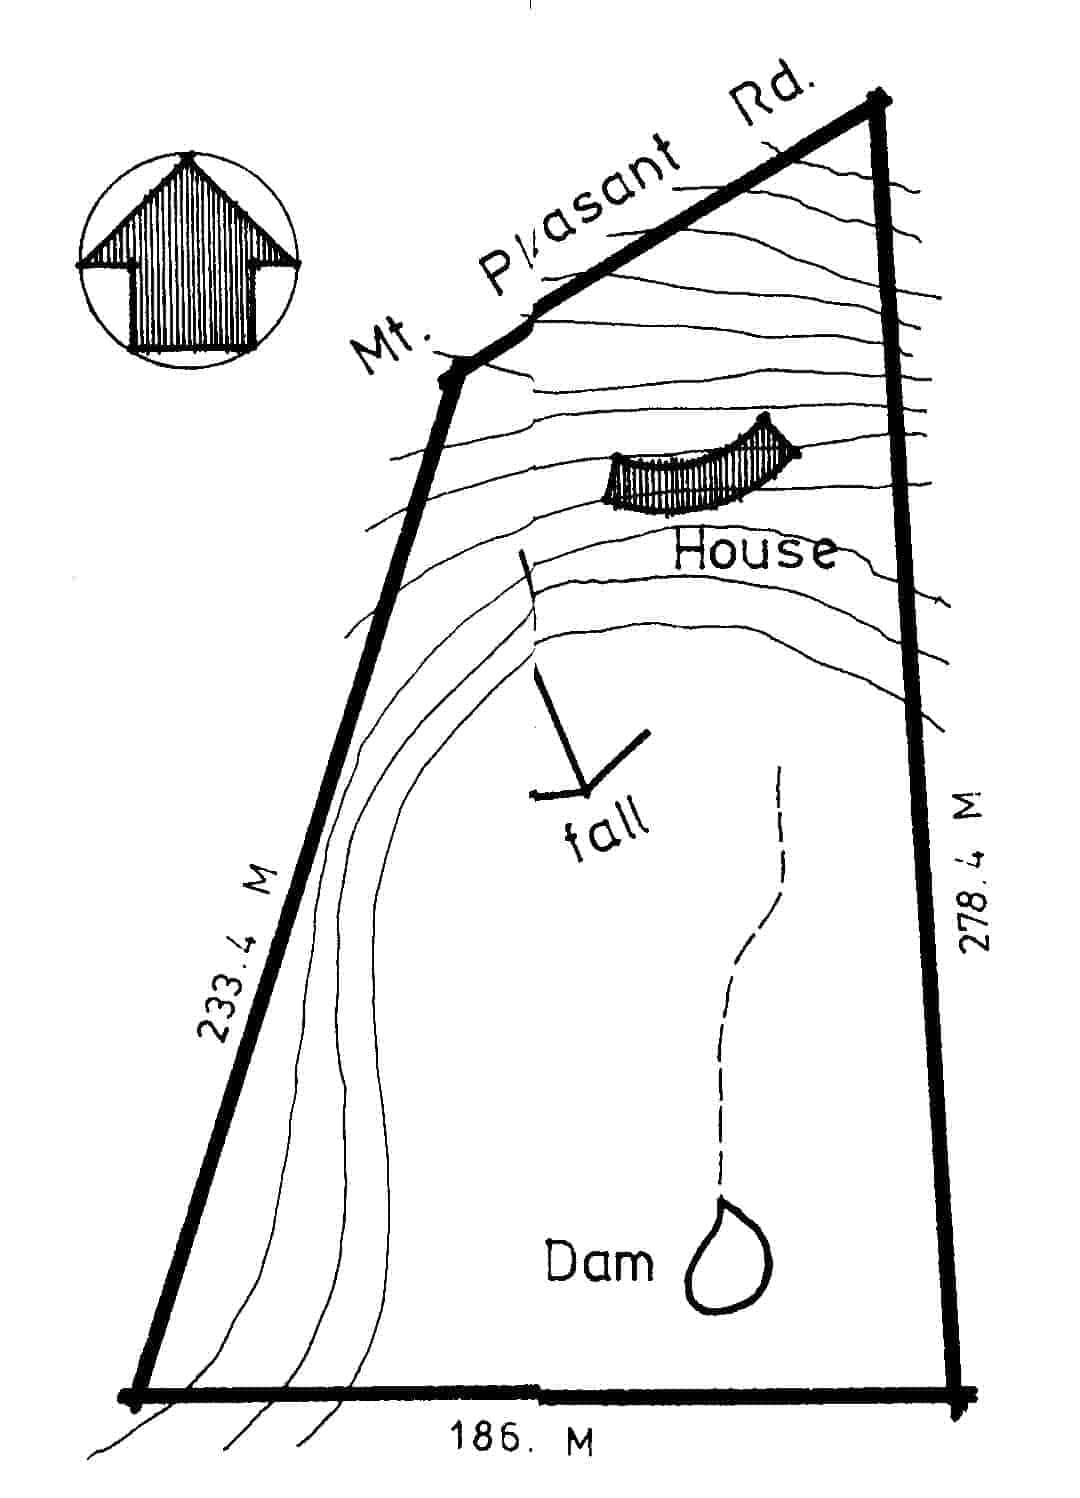 Site map of the Pittard house